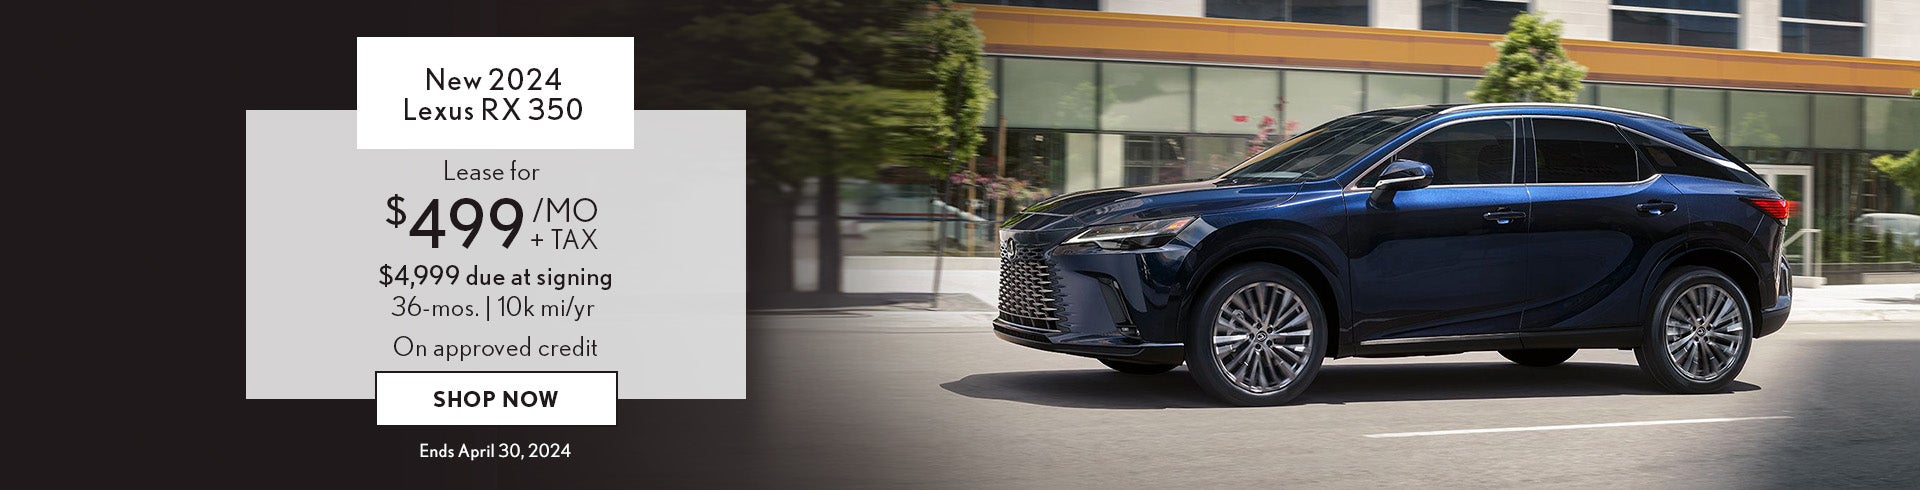 Lease a new 2024 Lexus RX 350 for $499/mo + tax